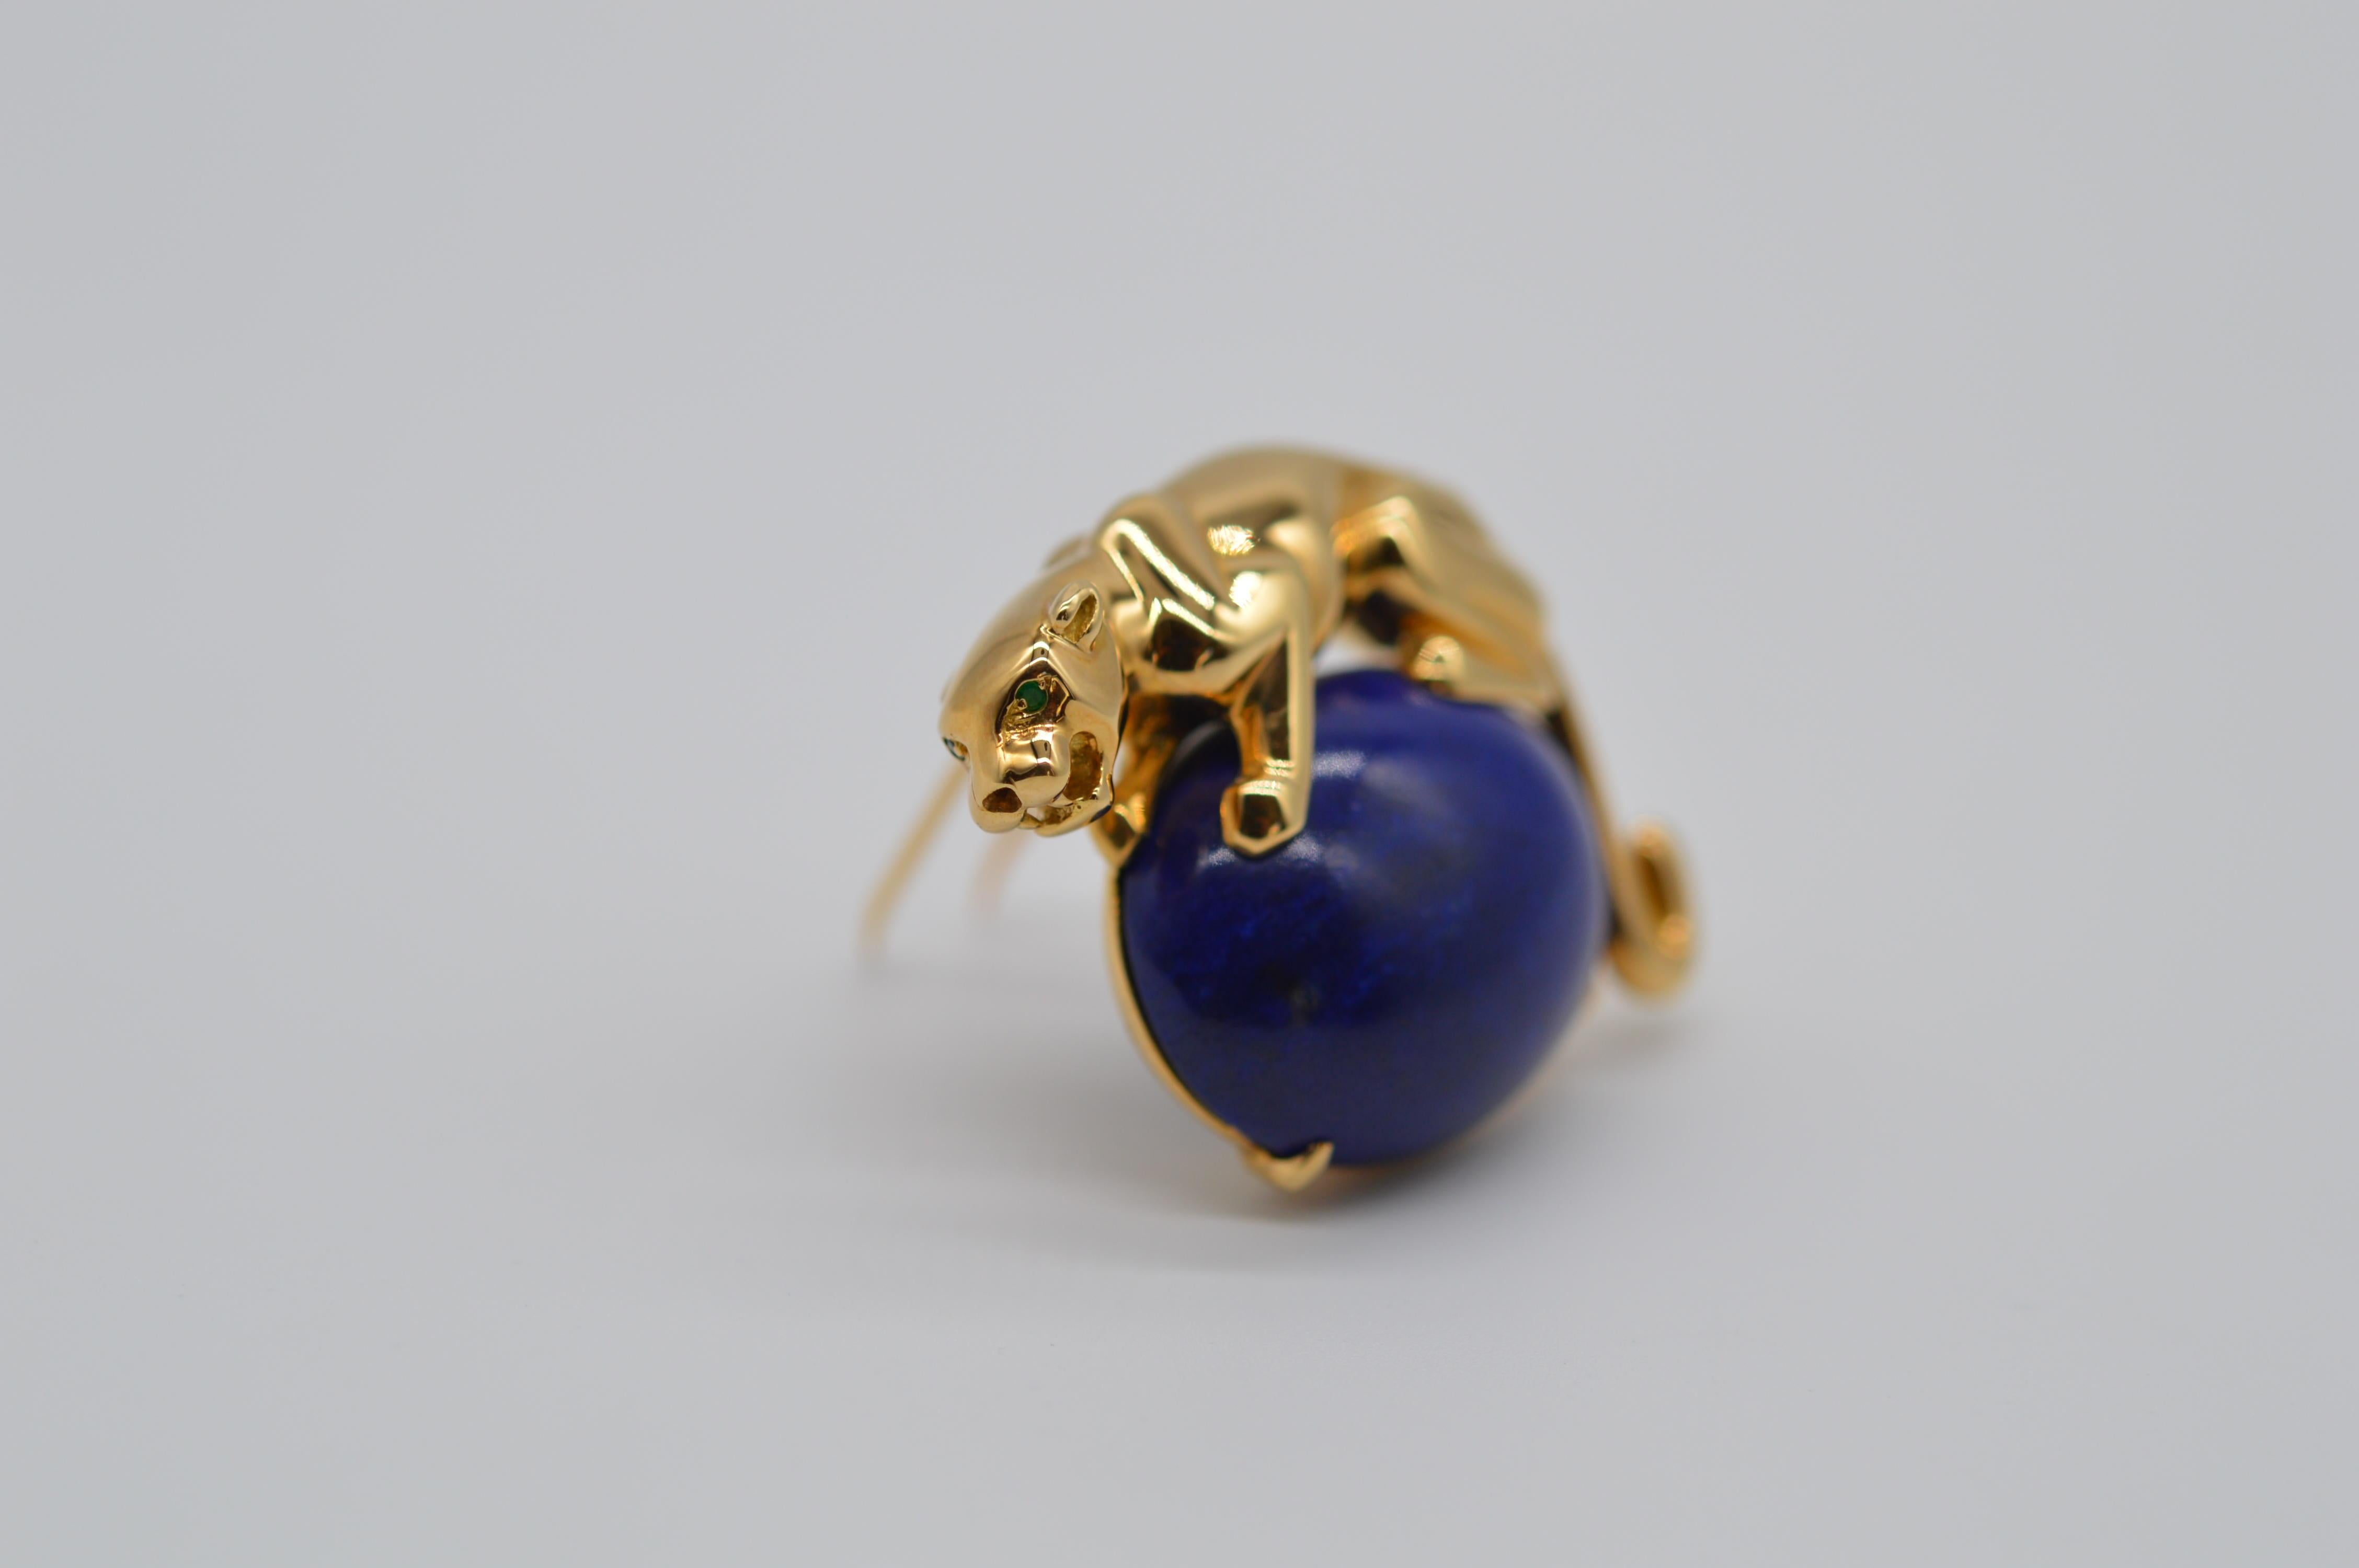 Cartier Panthère Lapis Lazuli Brooch
18K Yellow Gold
Weight 28.6 grams
Emerald Eyes
Vintage unworn condition
With original certificate from Cartier
From 1995